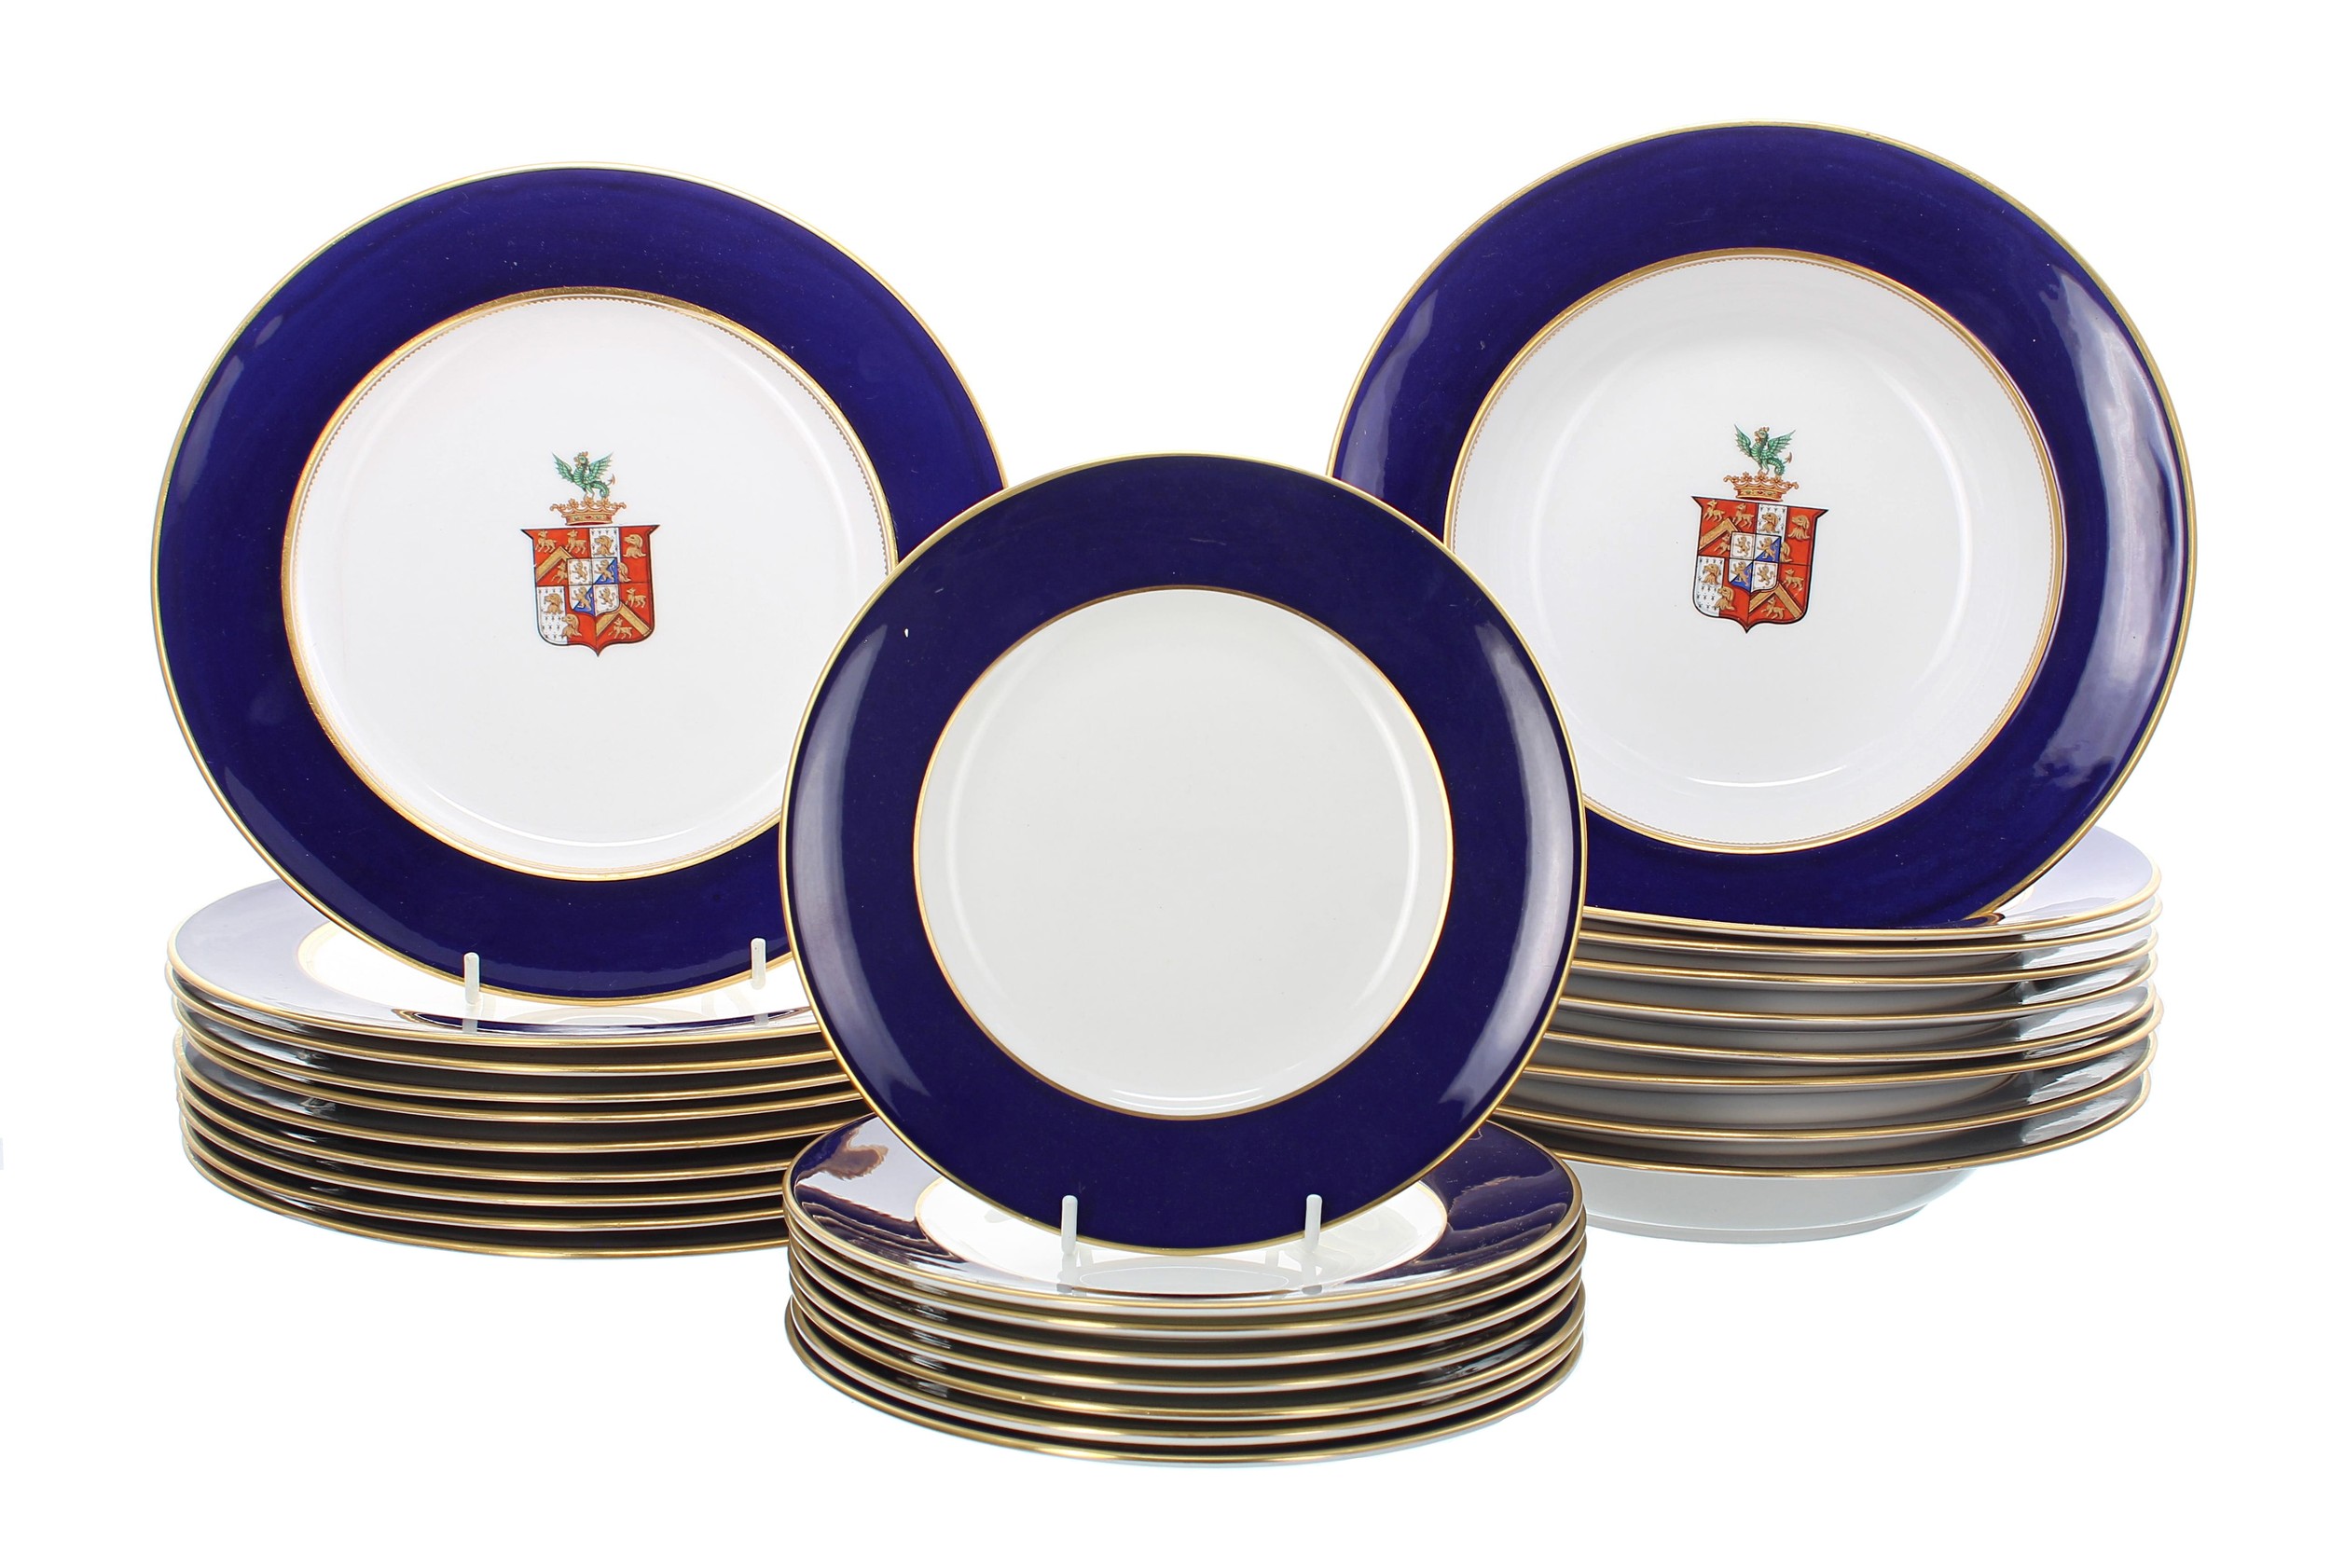 Copelands China for T. Goode & Co. porcelain crested dinner service, decorated with central shield - Image 2 of 4